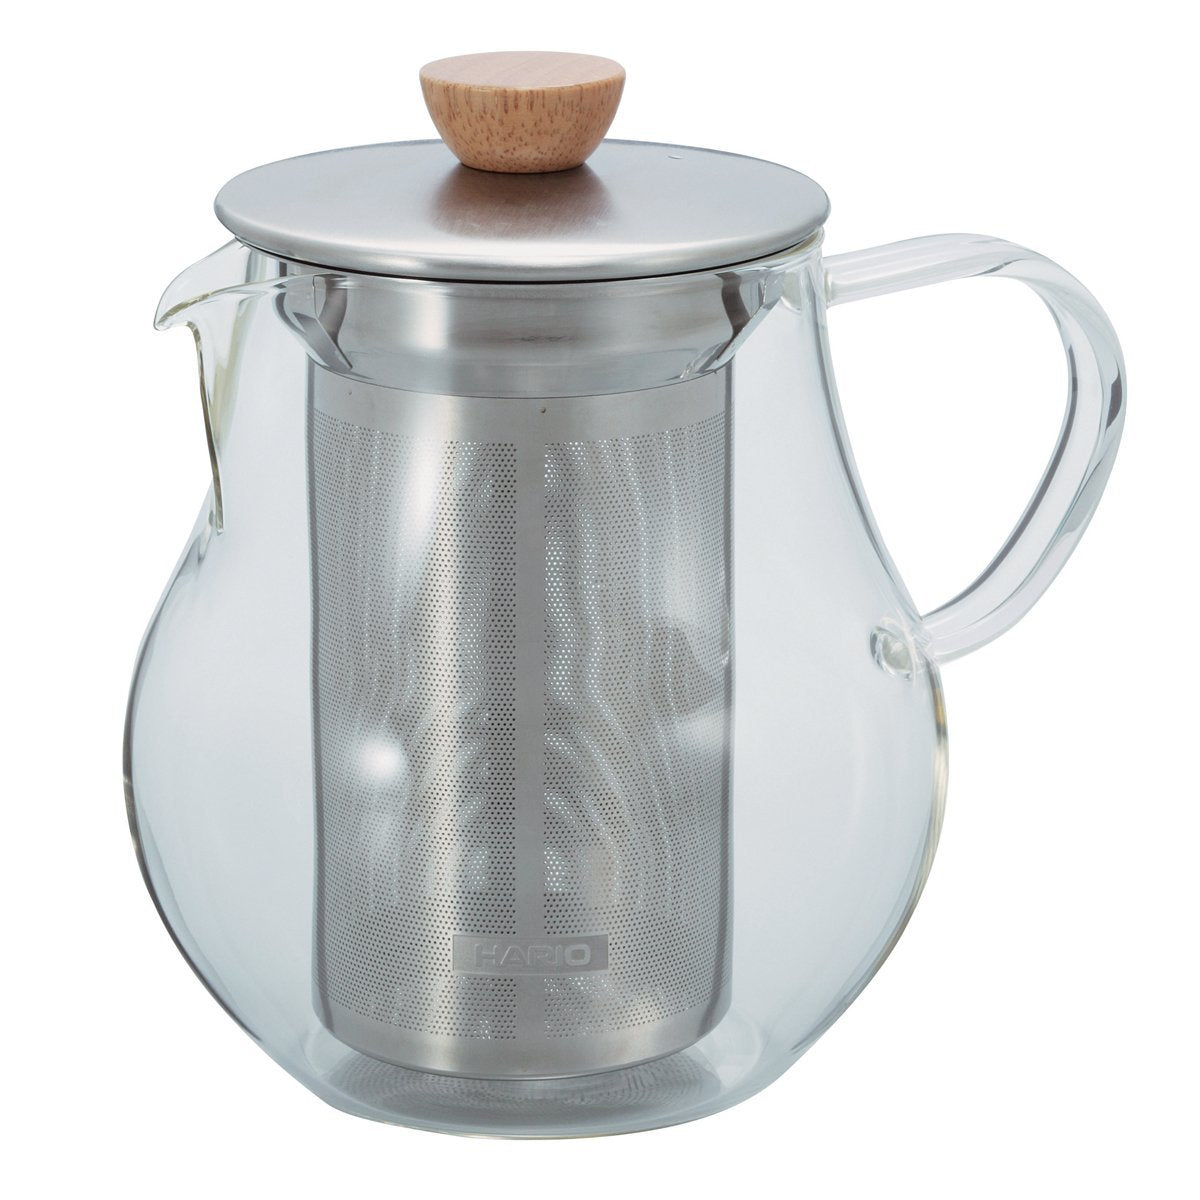 Hario Tea Pitcher with Stainless Steel Filter 700ml